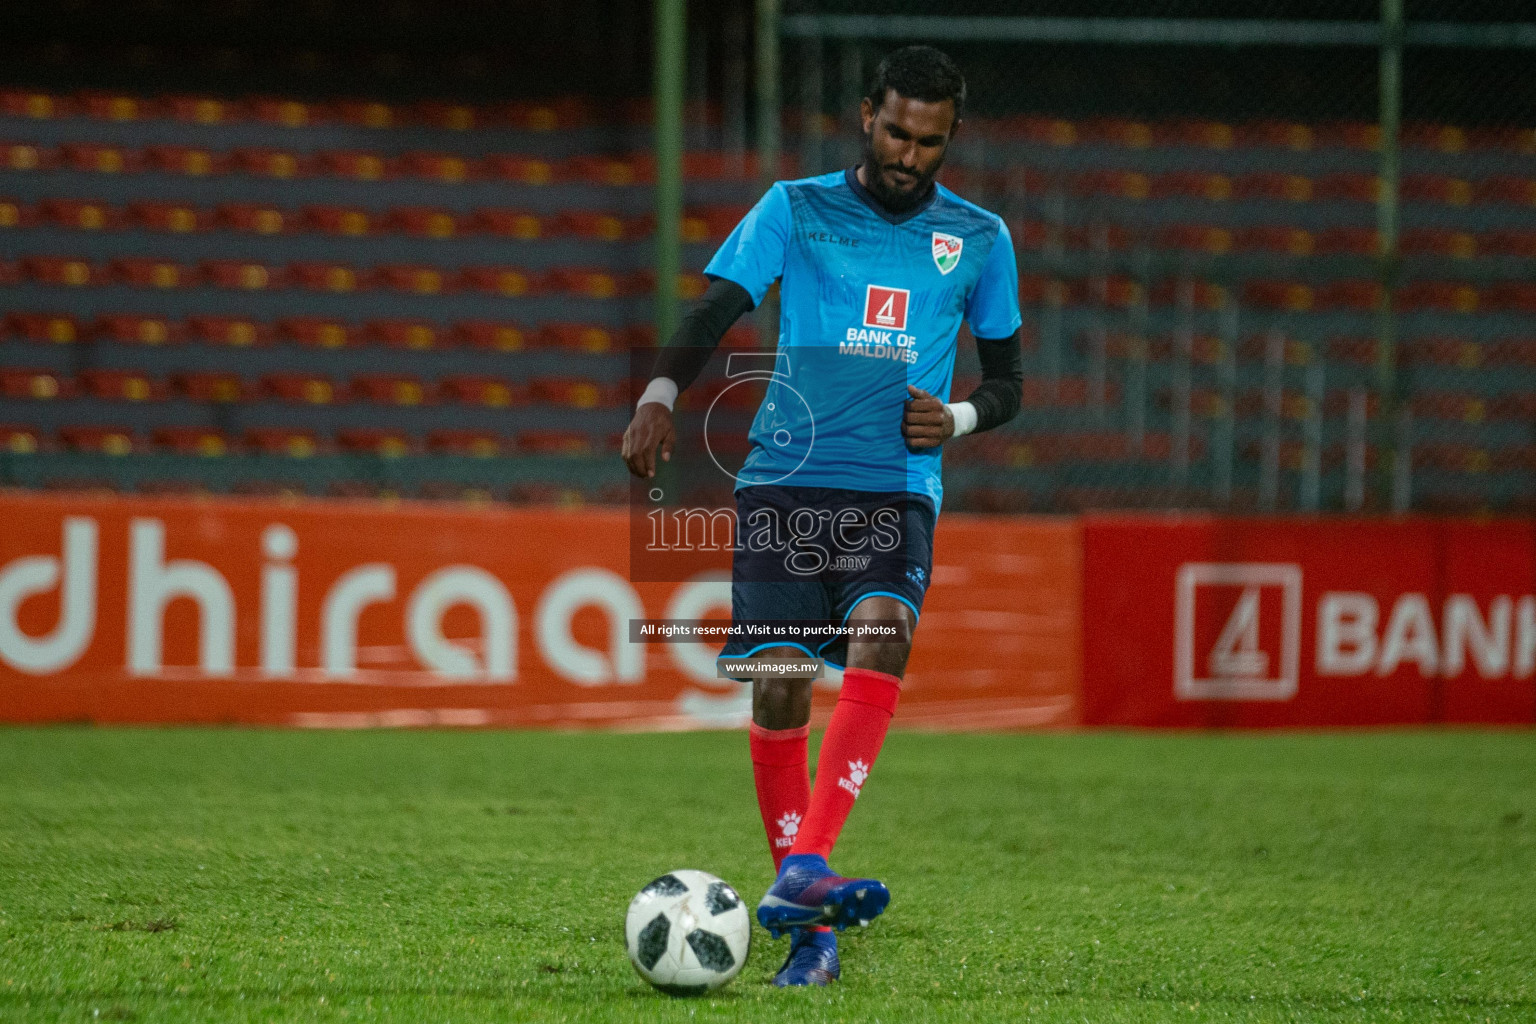 Maldives Practice Session for the FIfa World Cup Qatar 2022 & AFC Asian Cup China 2023 Qualifier match against China on 8th September 2019 in National Football Stadium, Male', Maldives. (Photos: Shuadh Abdul Sattar/images.mv)